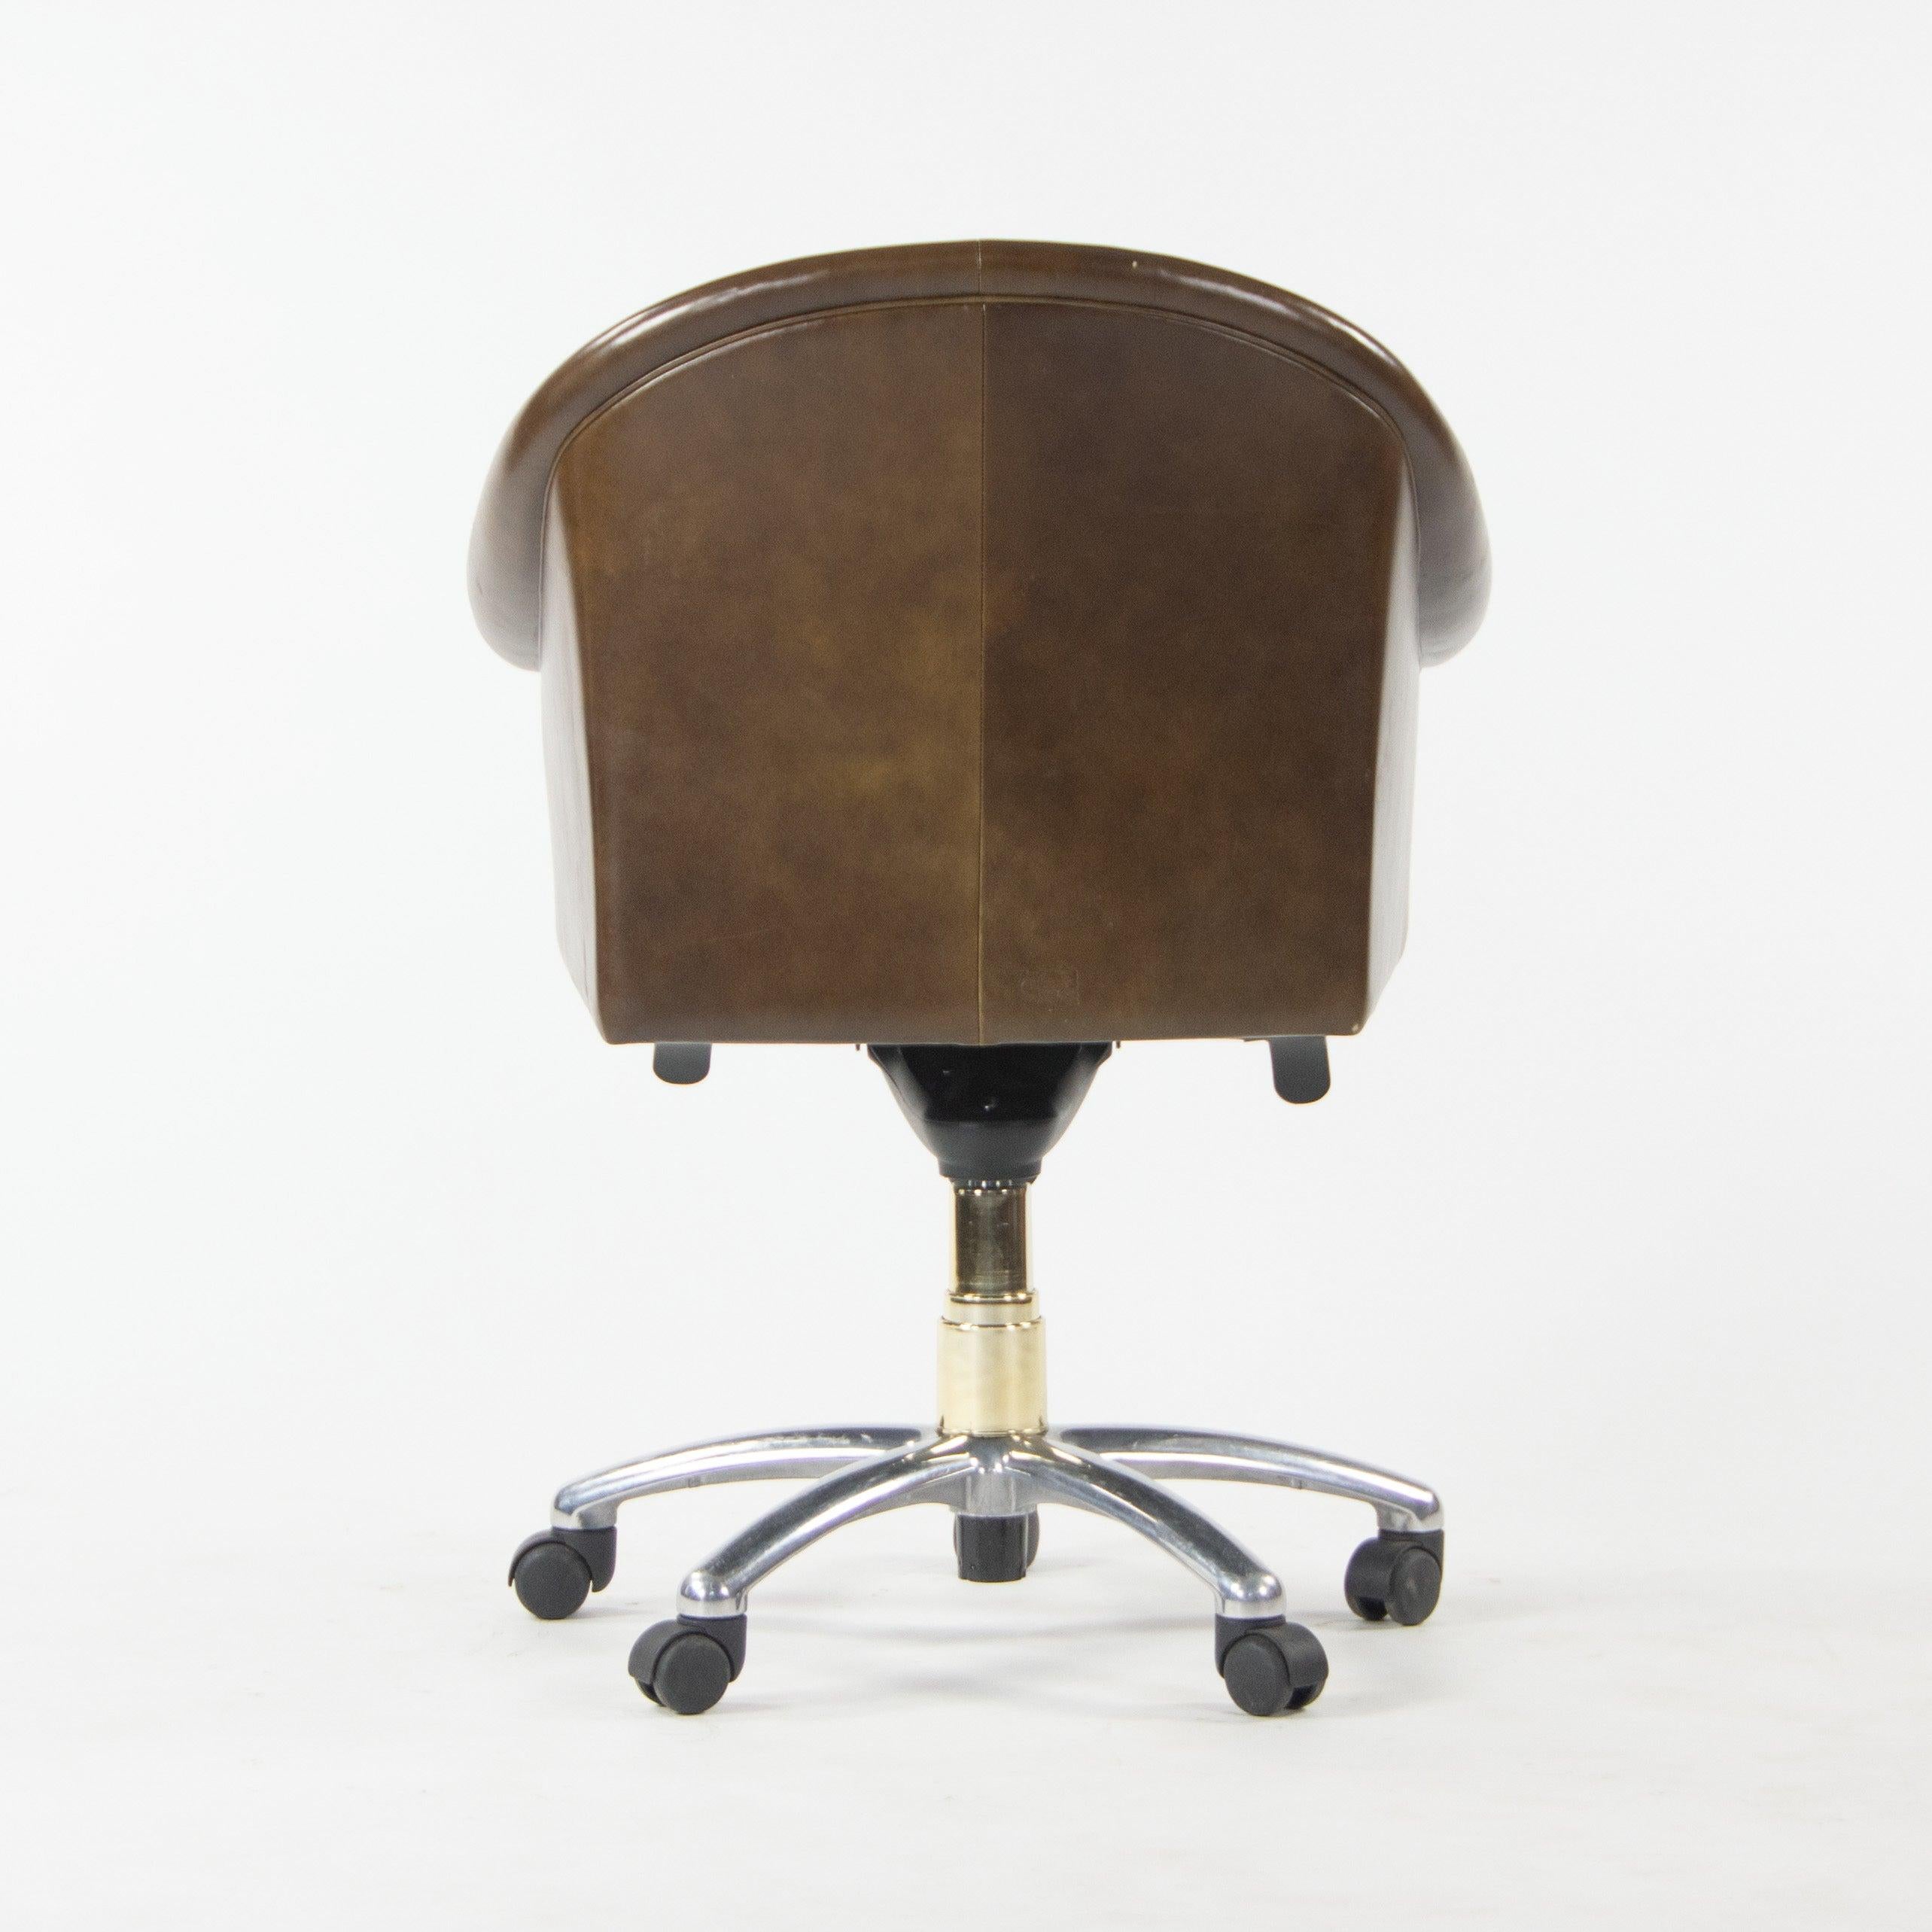 Poltrona Frau Brown Leather Luca Scacchetti Sinan Office Desk Chair In Good Condition For Sale In Philadelphia, PA